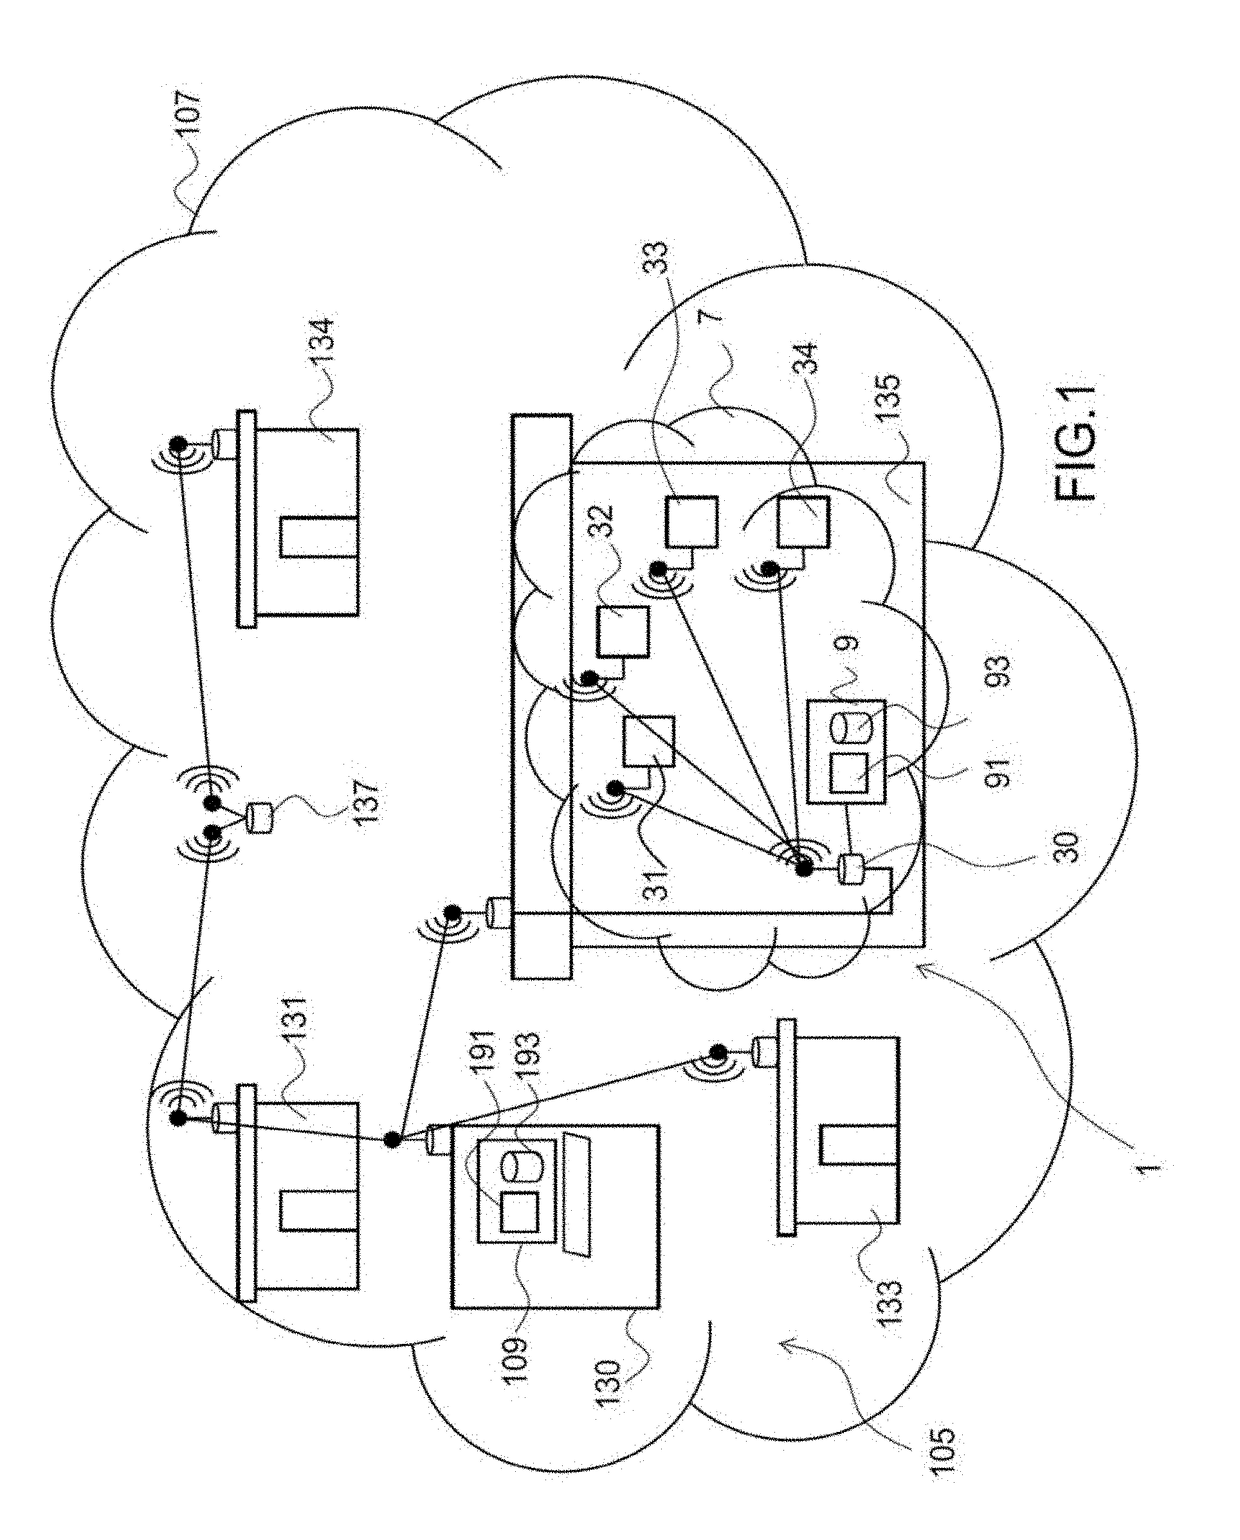 Control system and method of communications in an electric infrastructure